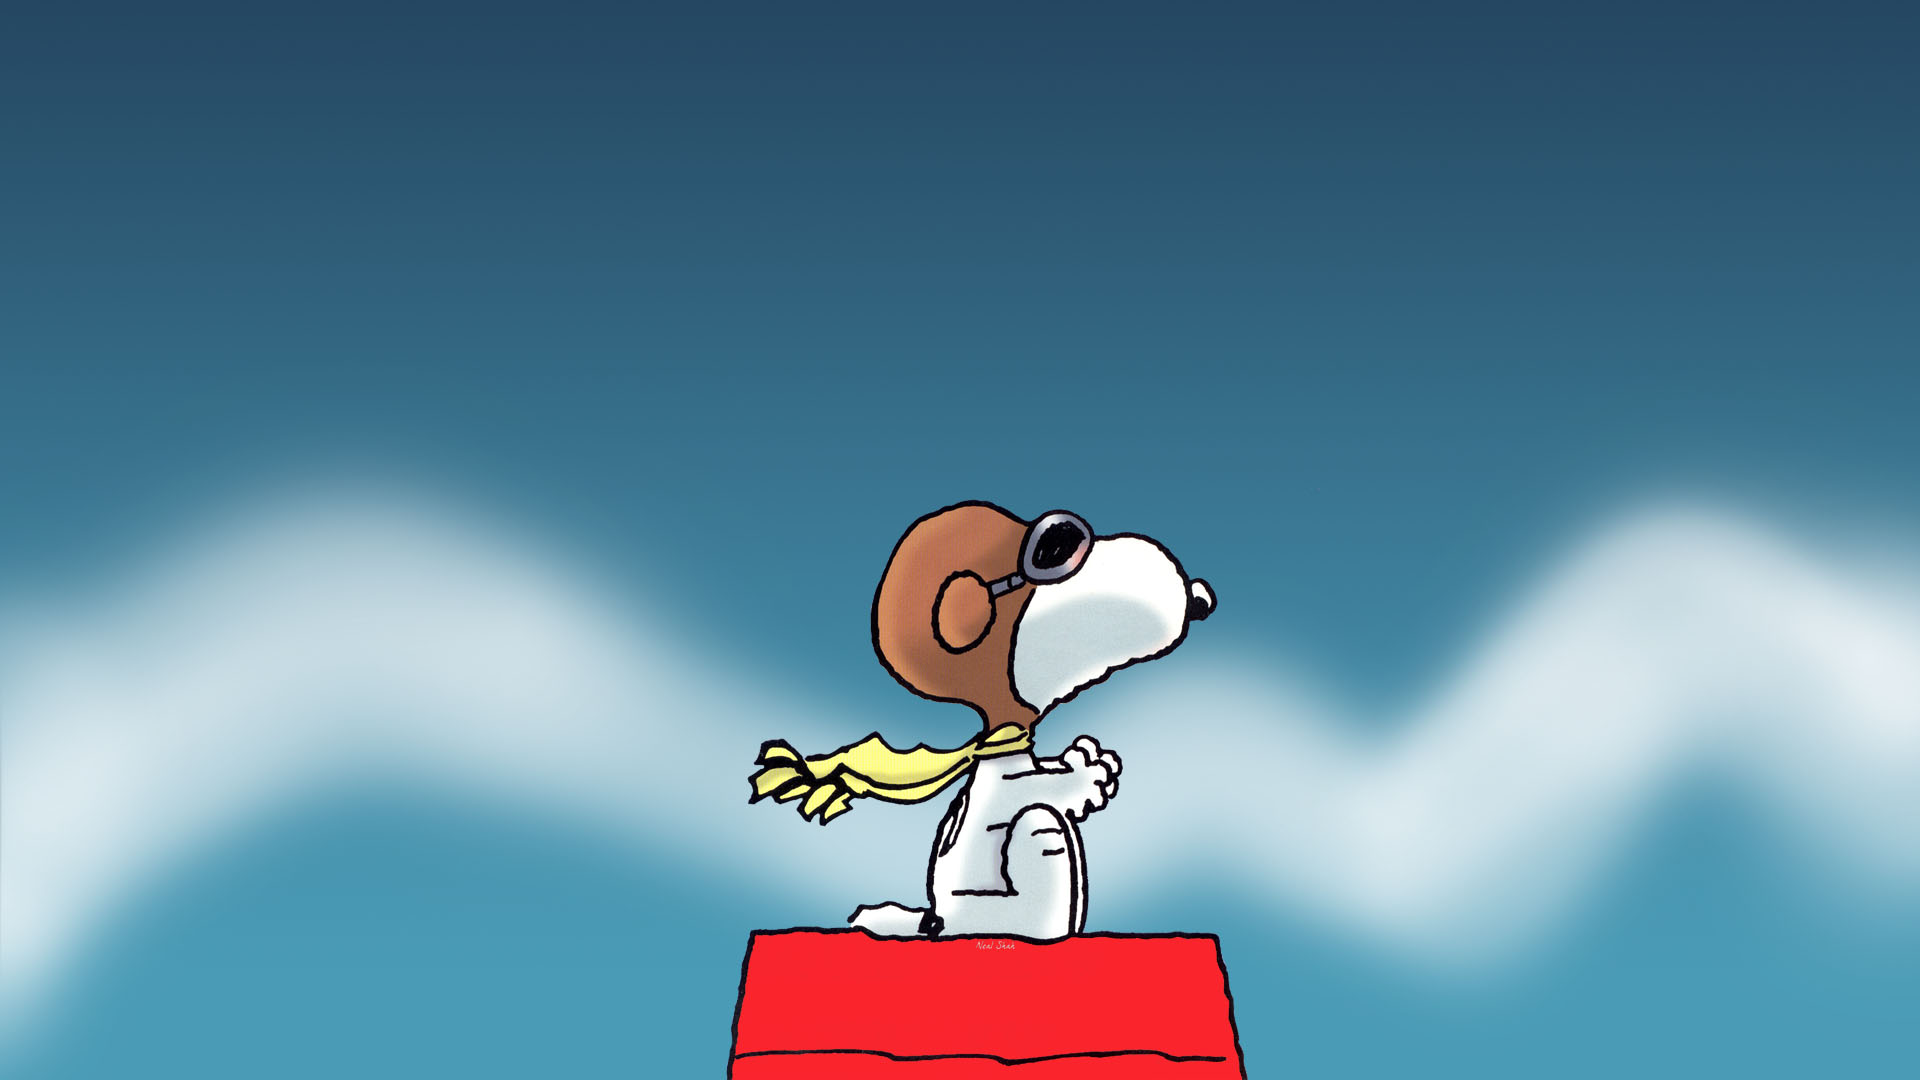 snoopy wallpaper for mac os